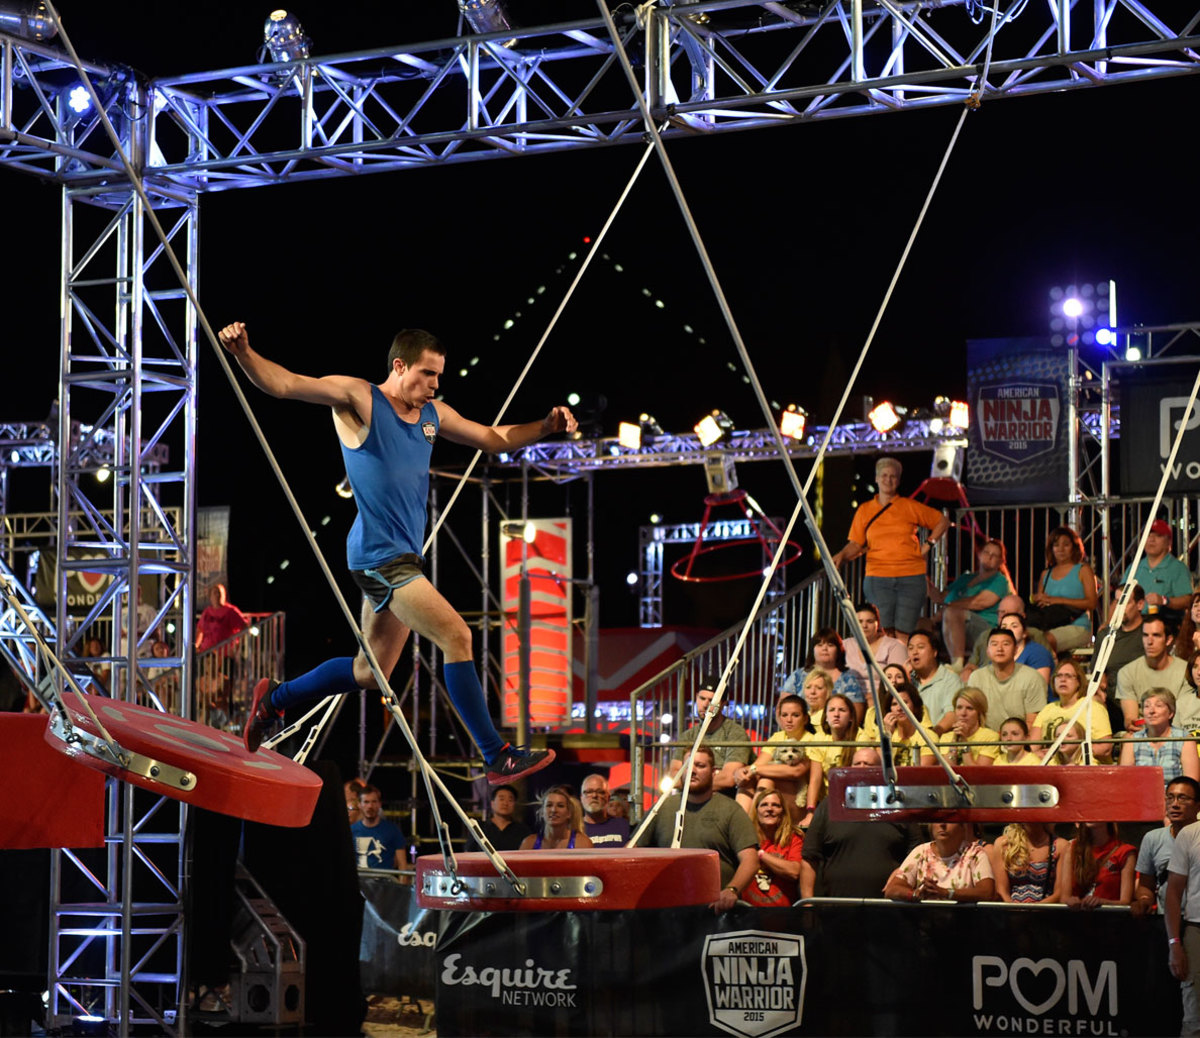 Build Your Own American Ninja Warrior Obstacle Course - Men's Journal